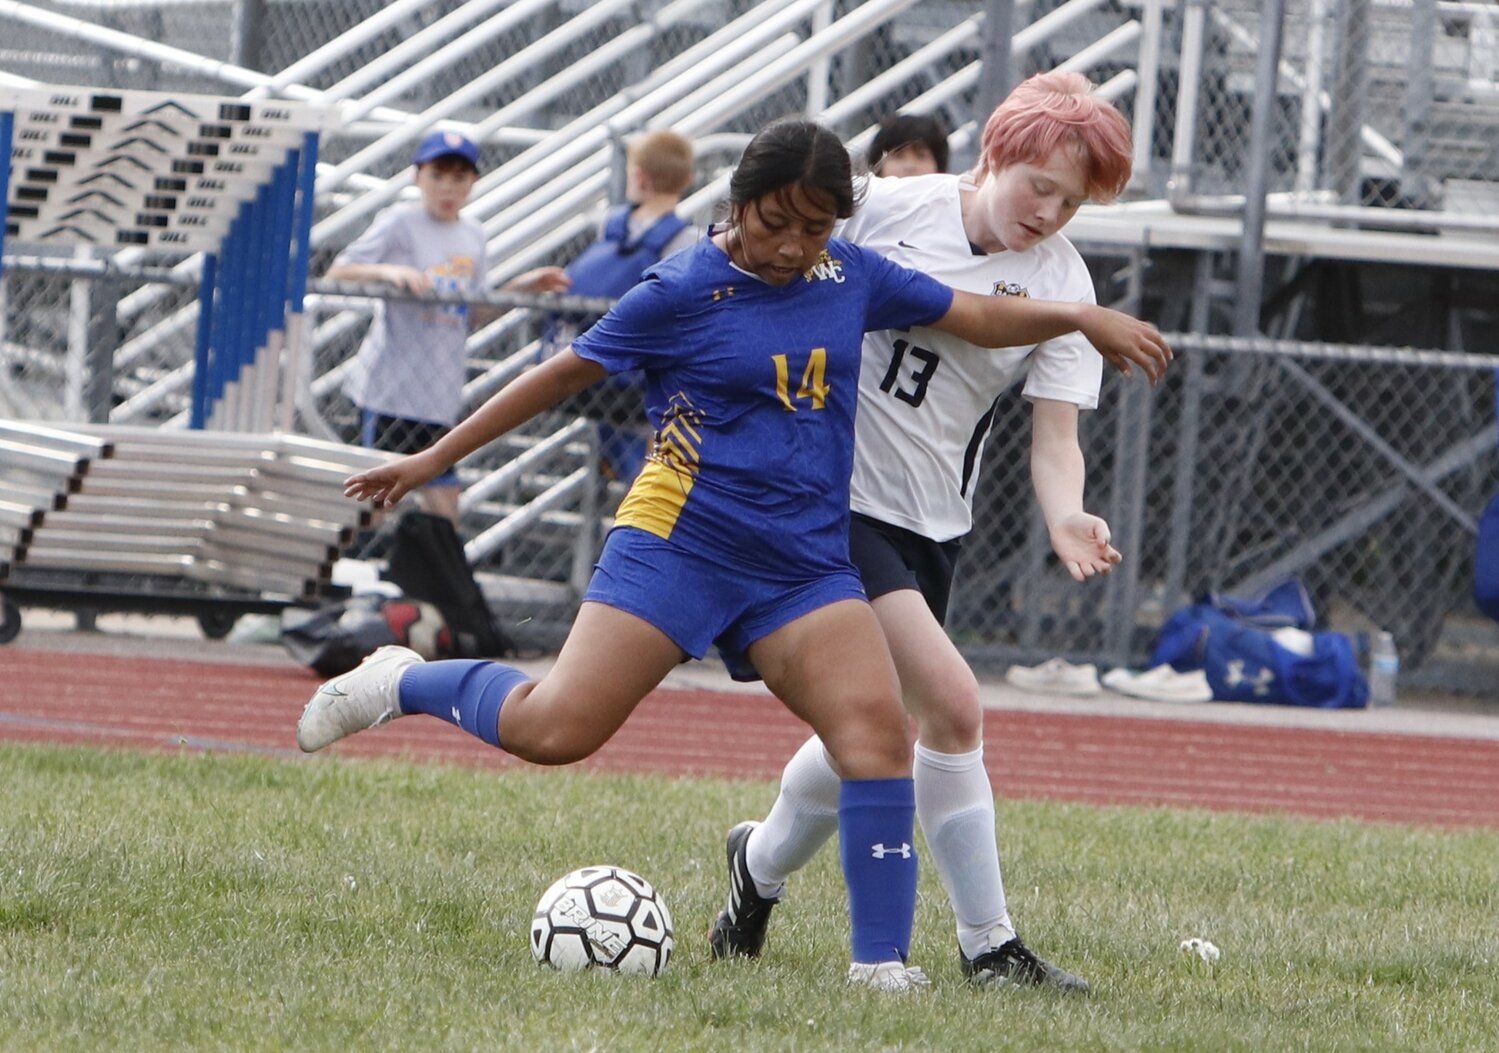 Ramona Diego prepares to kick the ball during the first half of last week's game.